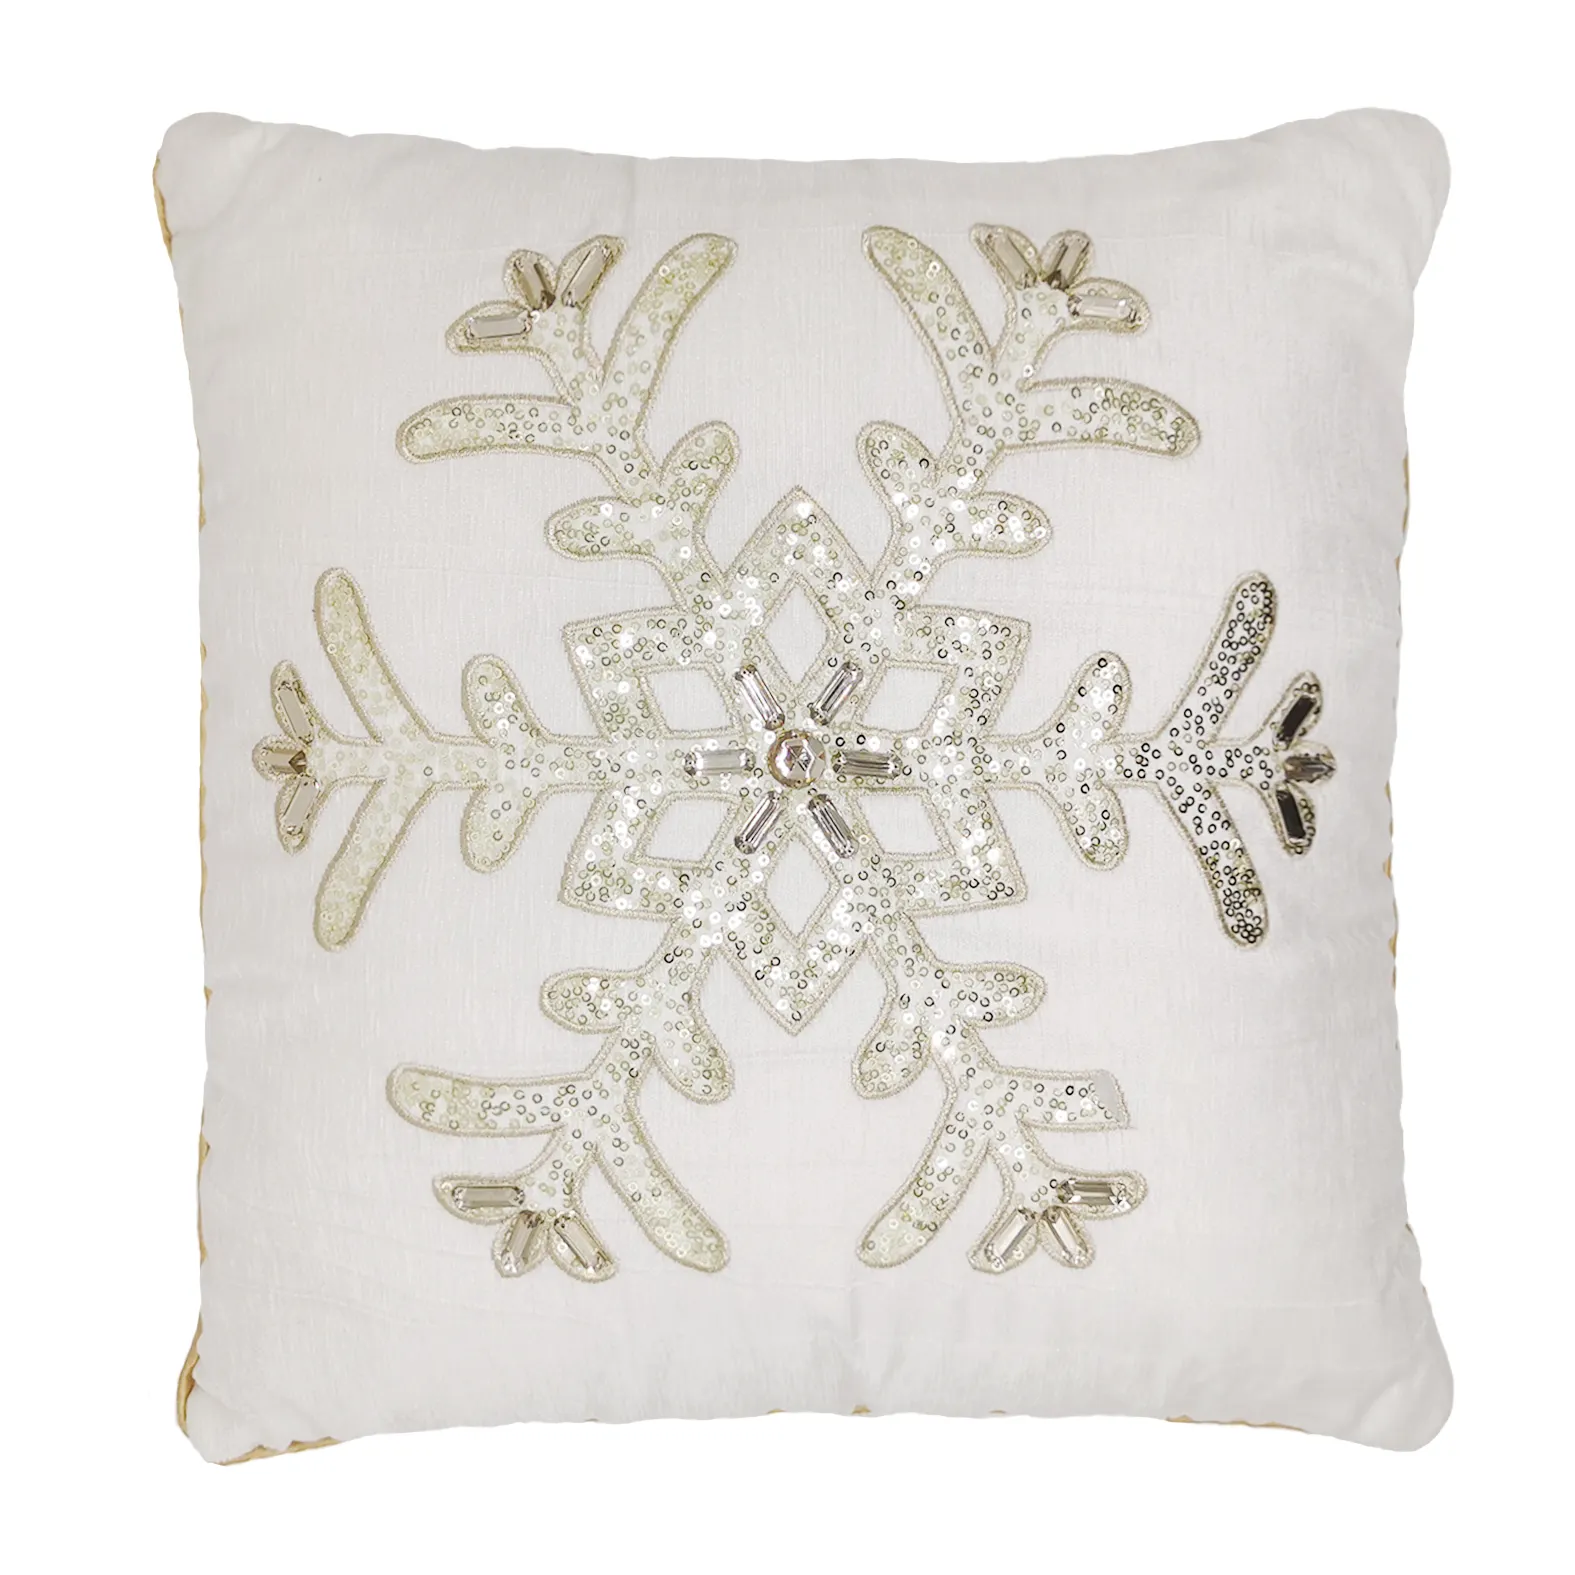 Decorative LED sequin handwork rhinestone snowflake silver designs throw cushion cover embroidery pillow case Christmas